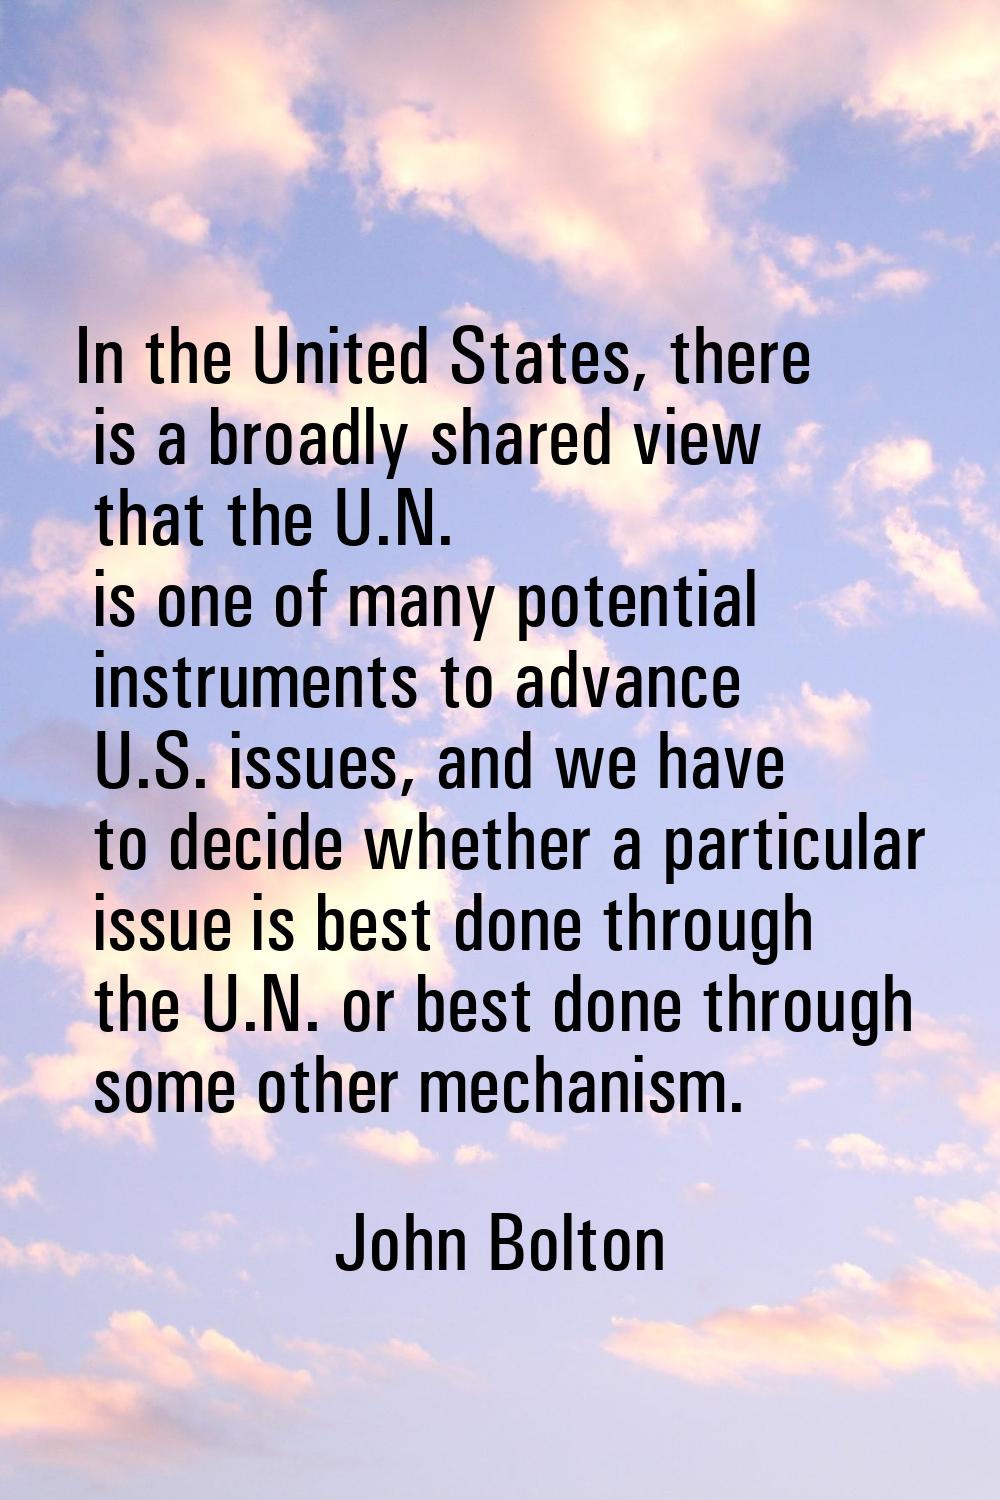 In the United States, there is a broadly shared view that the U.N. is one of many potential instrum